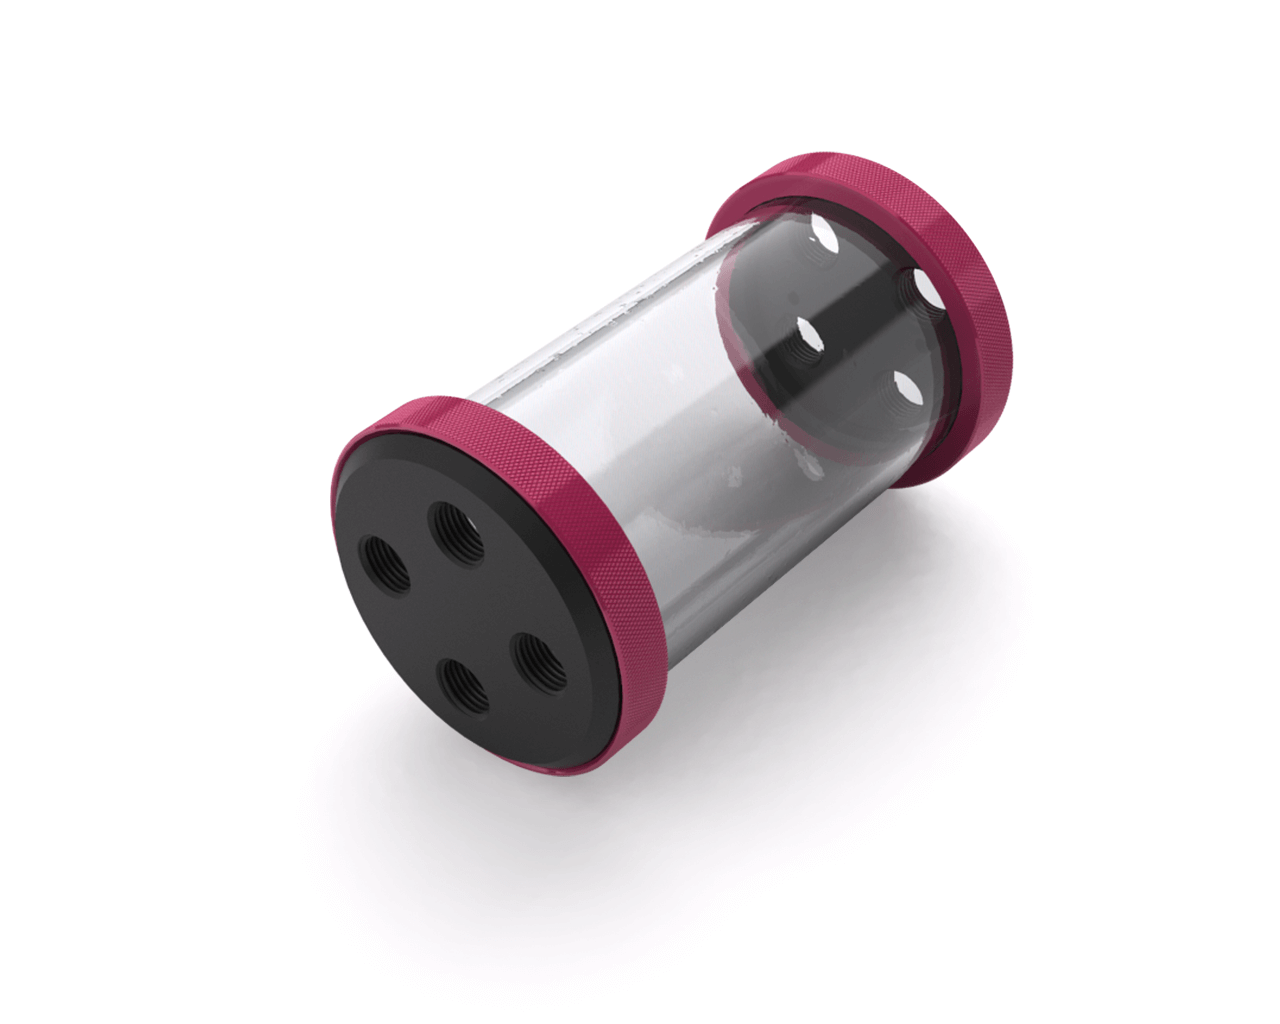 PrimoChill CTR Low Profile Phase II Reservoir - Black POM - 120mm - PrimoChill - KEEPING IT COOL Candy Pink